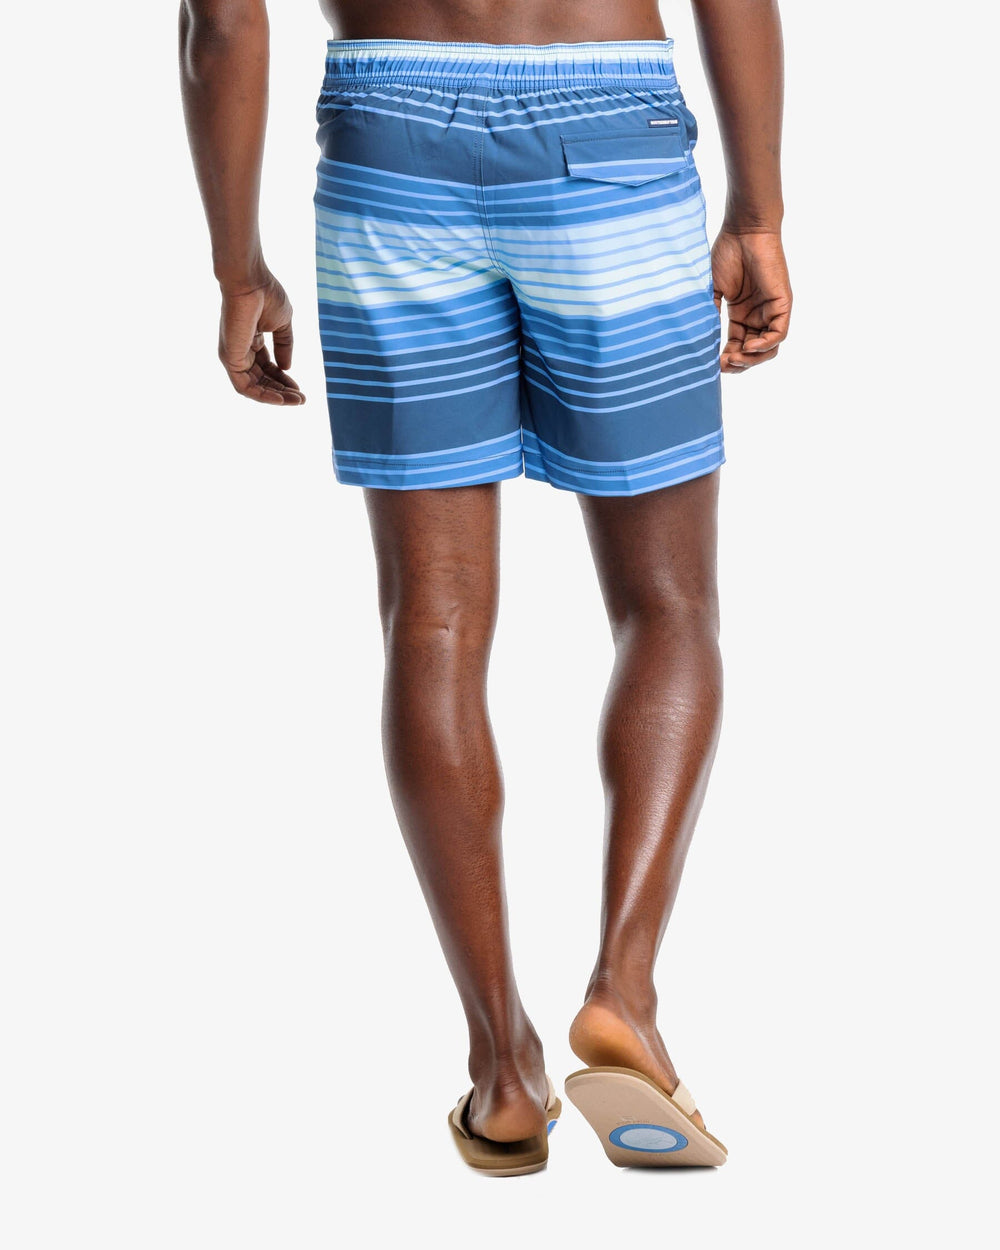 The back view of the Southern Tide Wateree Stripe Printed Swim Short by Southern Tide - Aged Denim